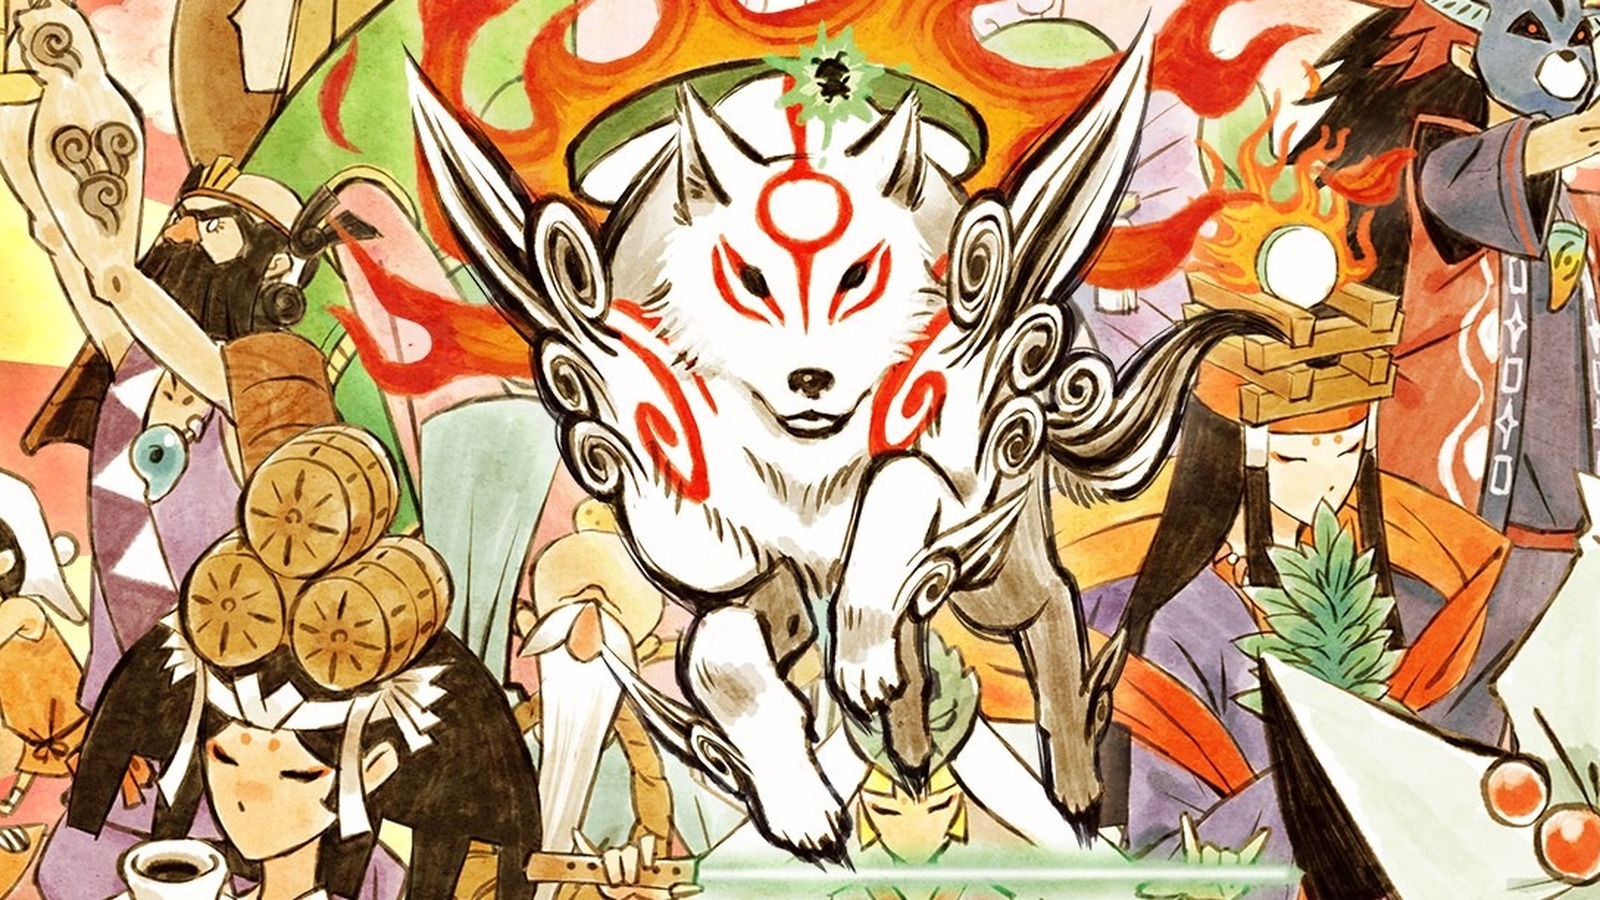 The year in video game news: The 10 best (led by `Okami') and the